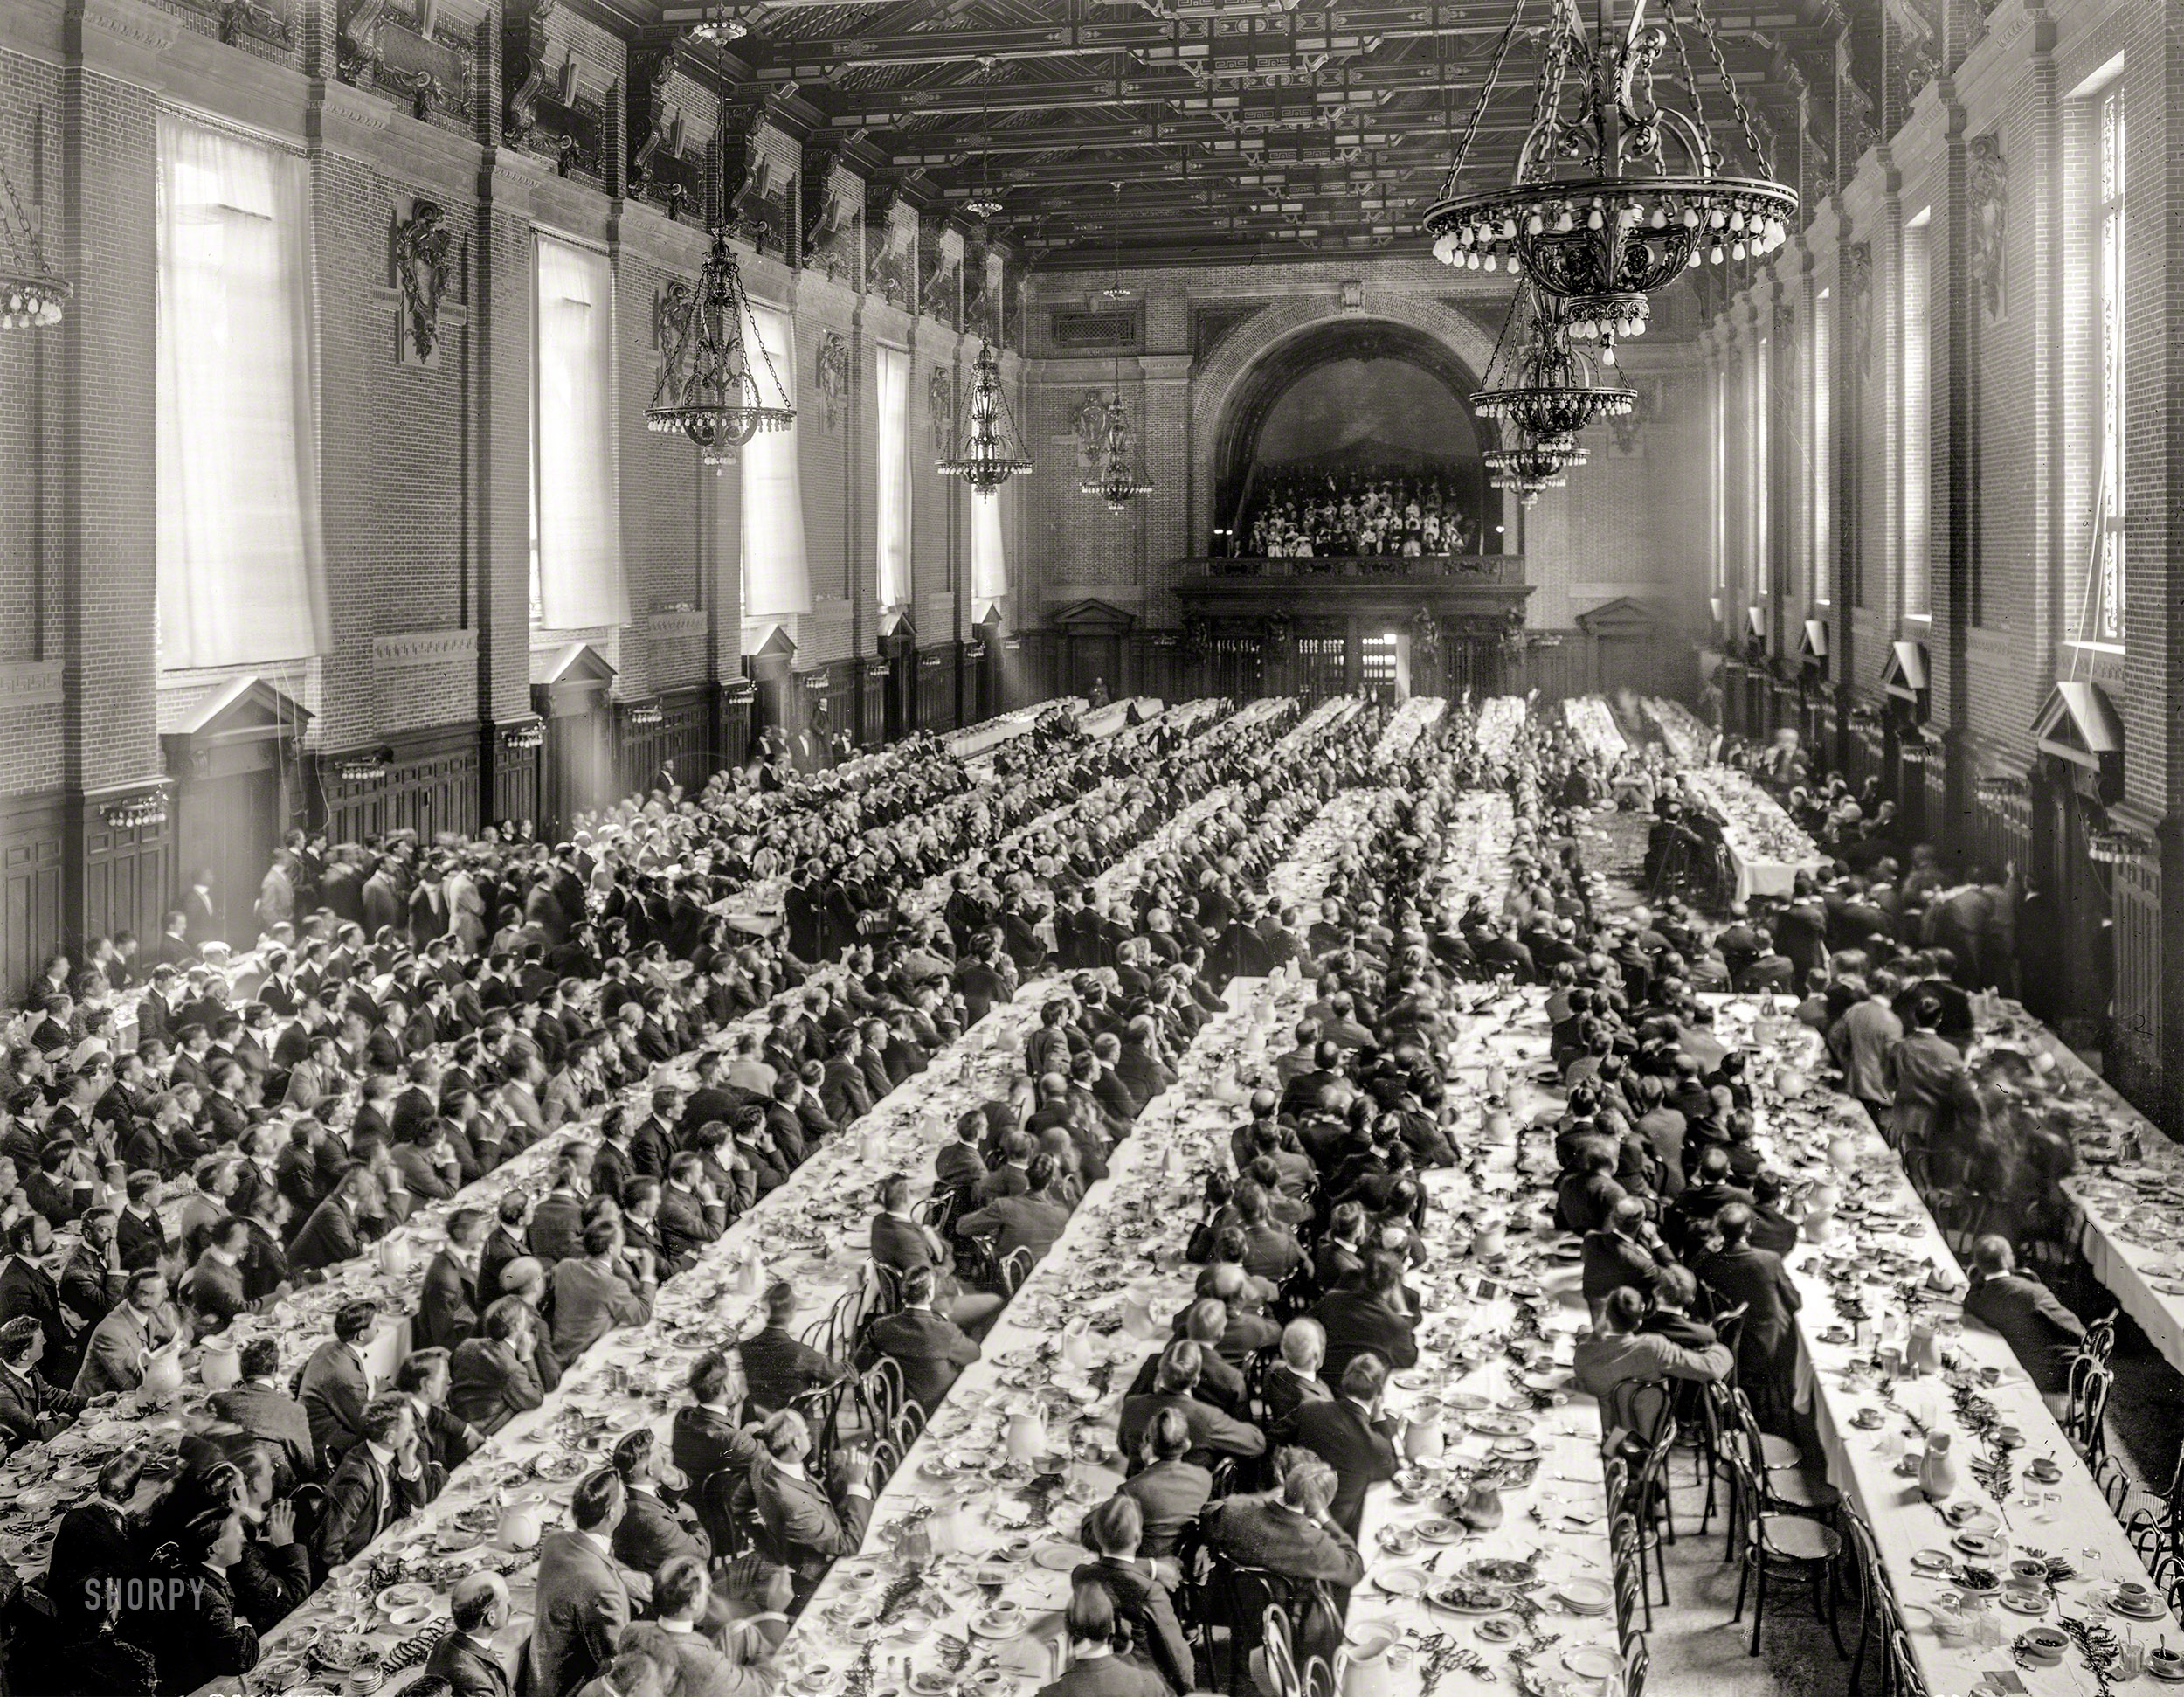 New Haven, Conn., circa 1902. "Banquet in Alumni Hall (University Commons), Yale College." Ladies will please retire to the balcony. View full size.